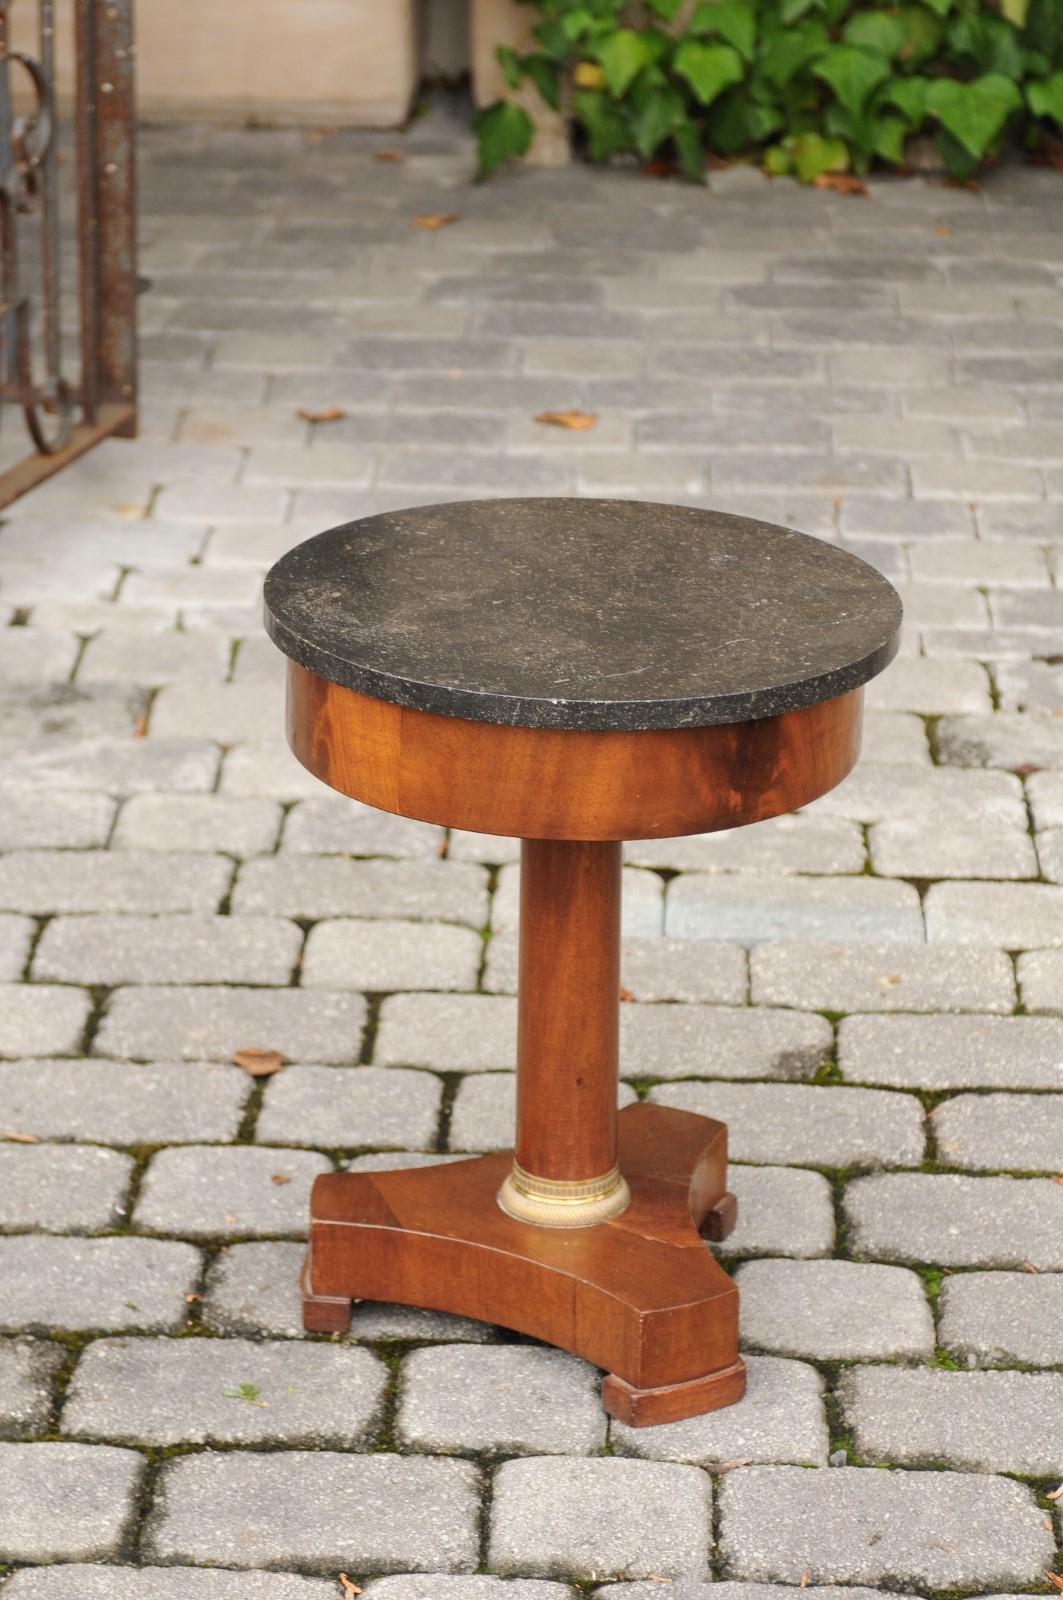 Petite 1870s French Empire Style Guéridon Table with Marble Top and Pedestal 6